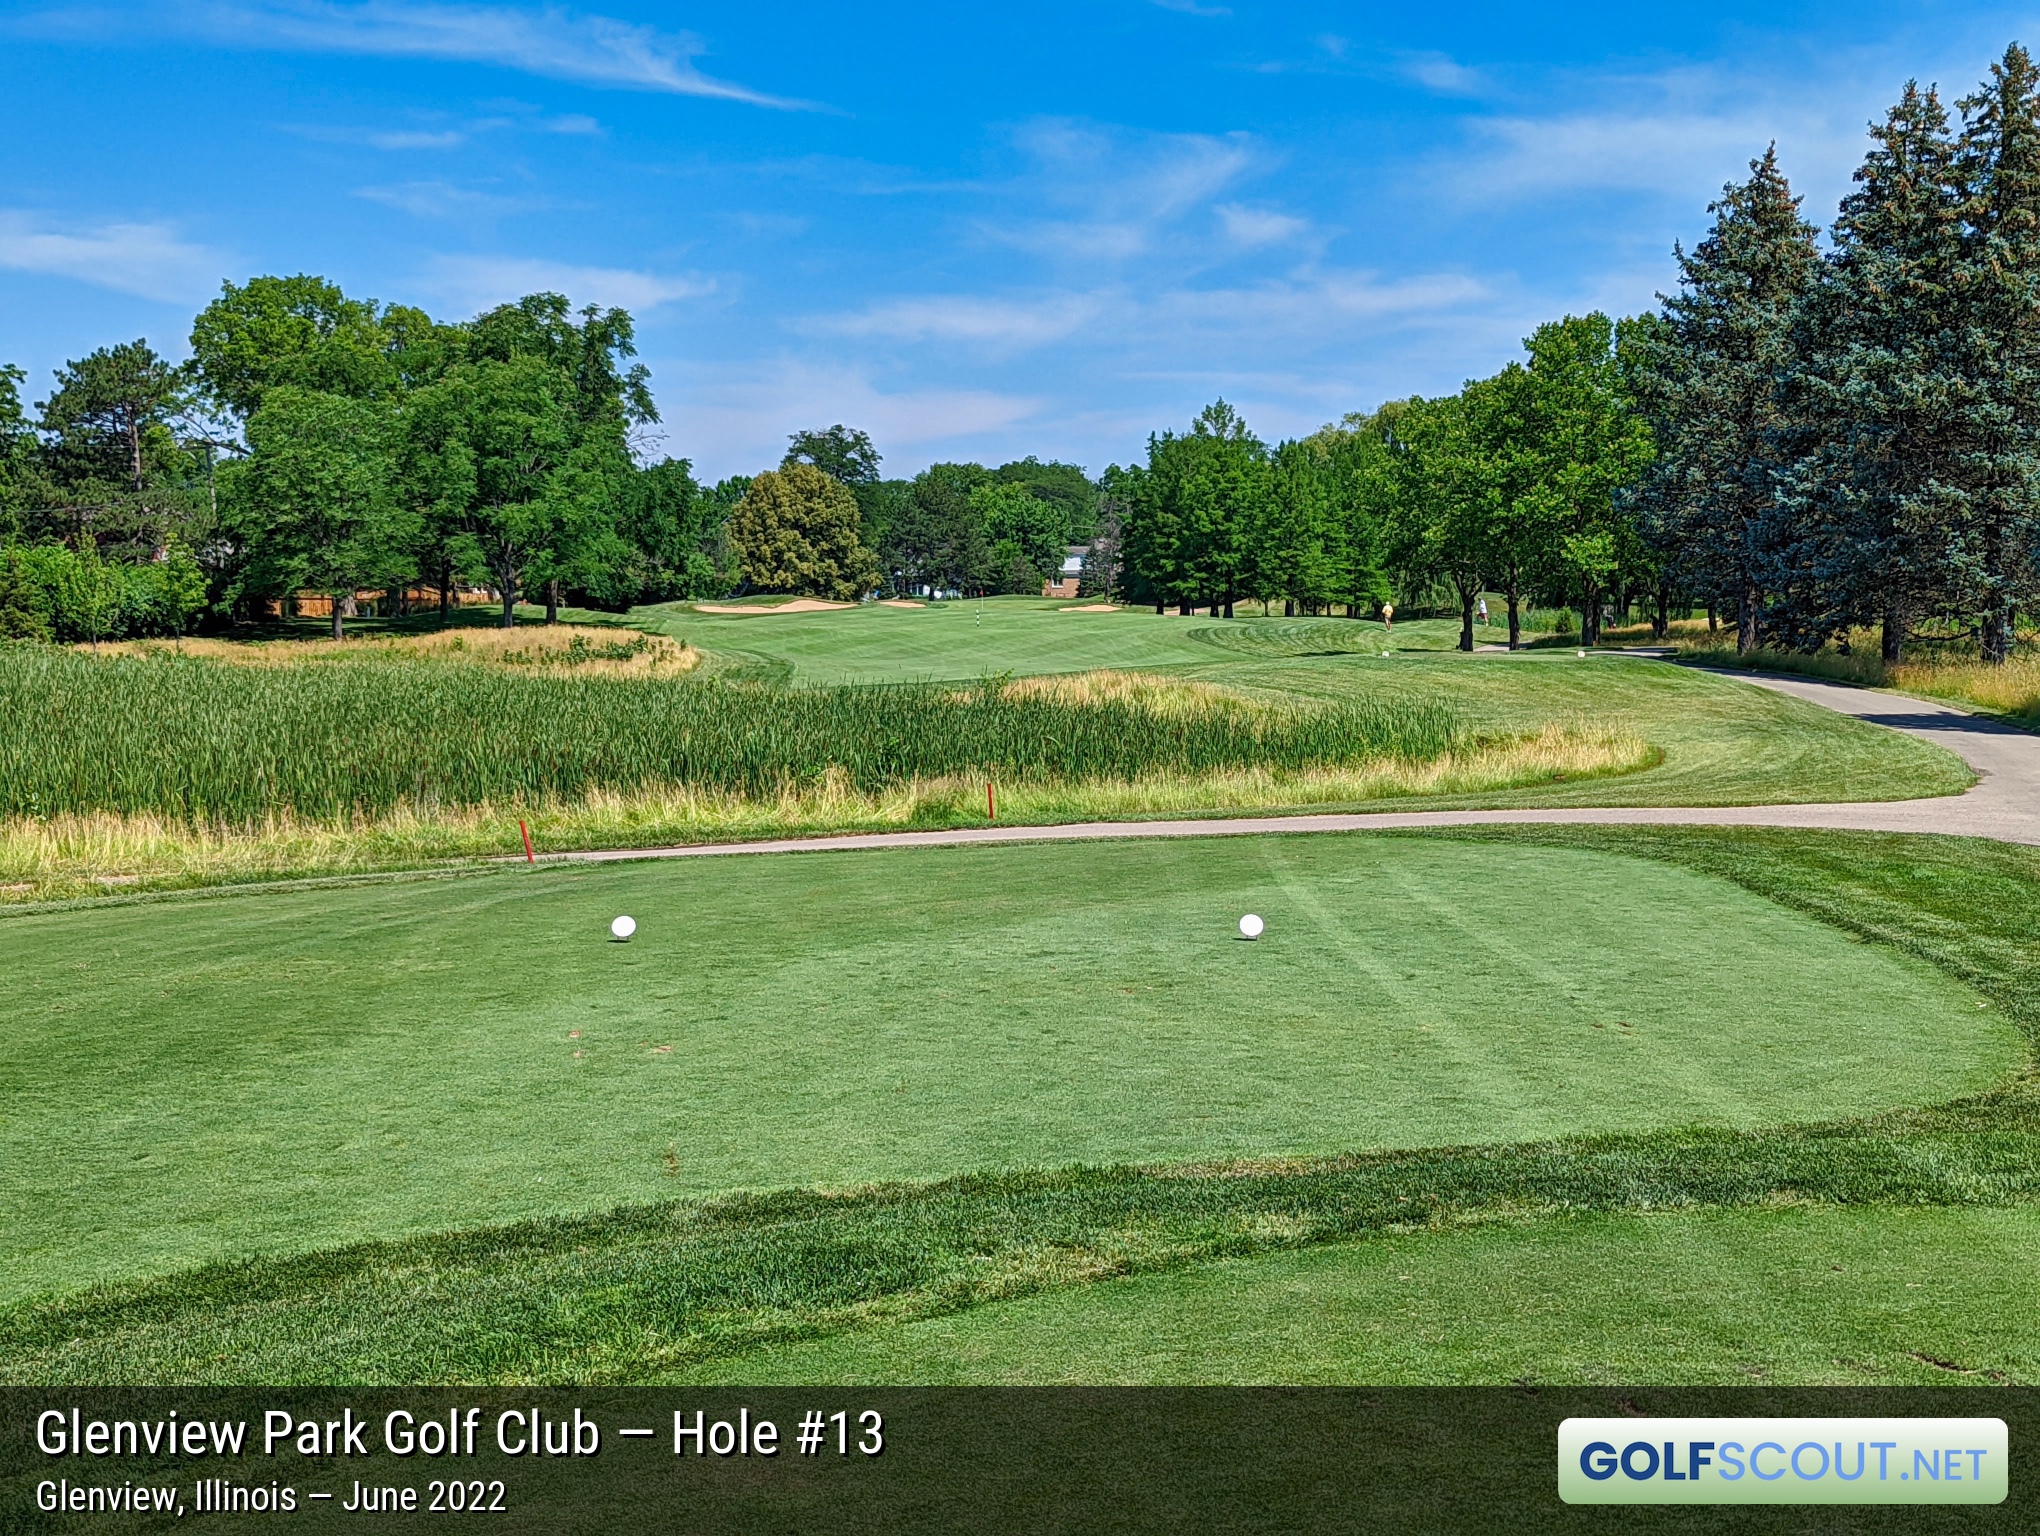 Photo of hole #13 at Glenview Park Golf Club in Glenview, Illinois. 